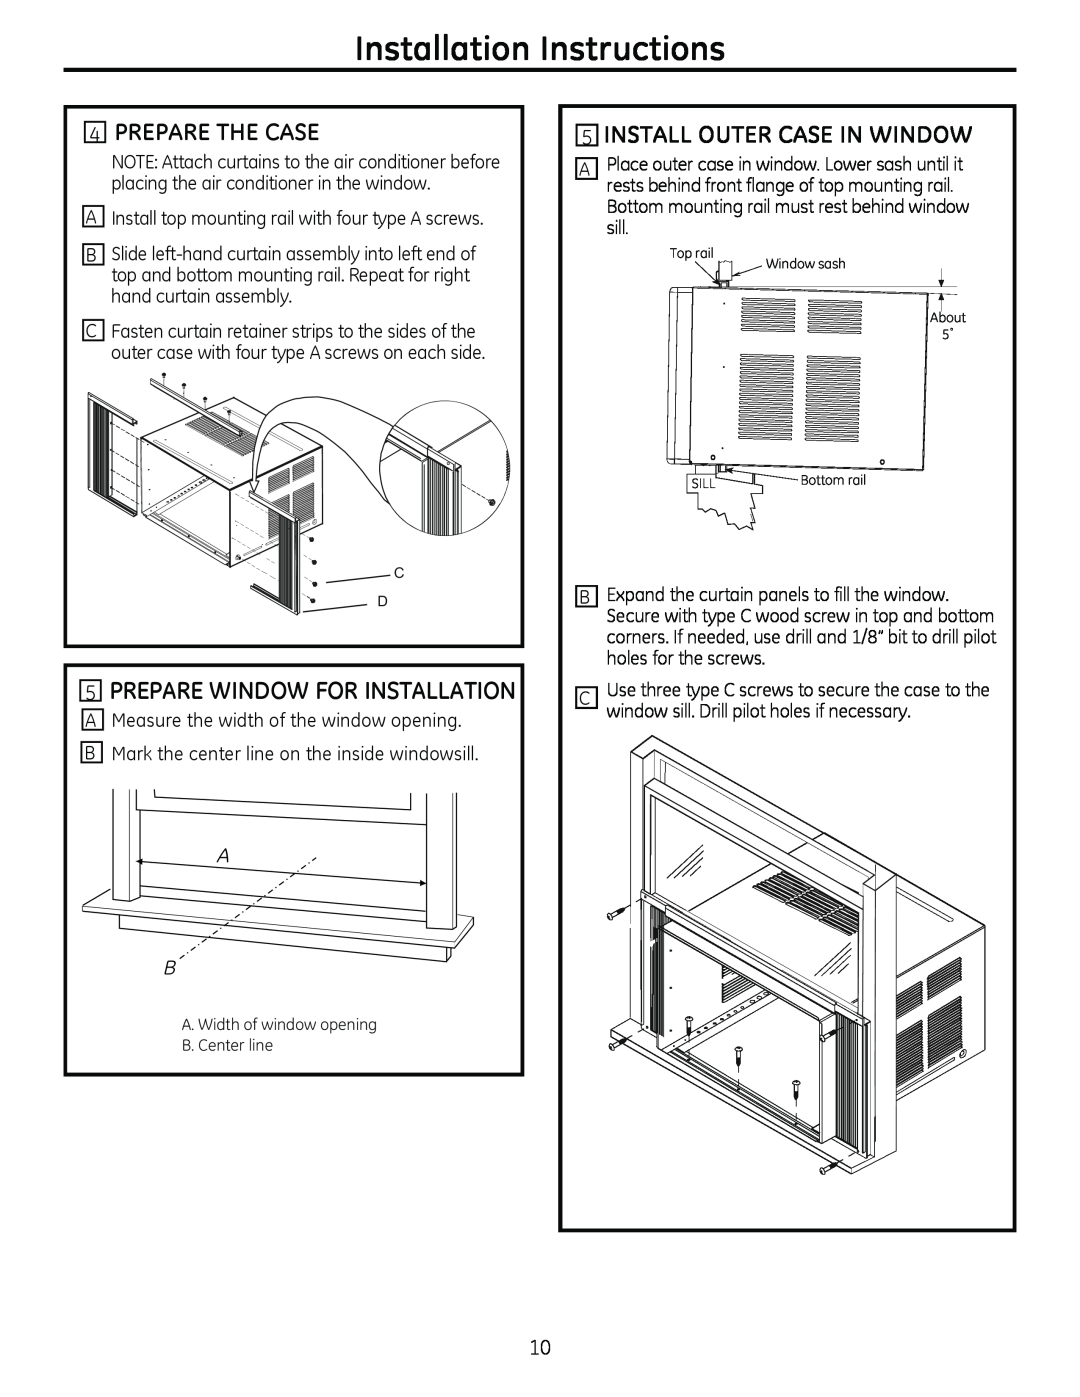 GE AHM18 4PREPARE THE CASE, 5INSTALL OUTER CASE IN WINDOW, 5PREPARE WINDOW FOR INSTALLATION, Installation Instructions 